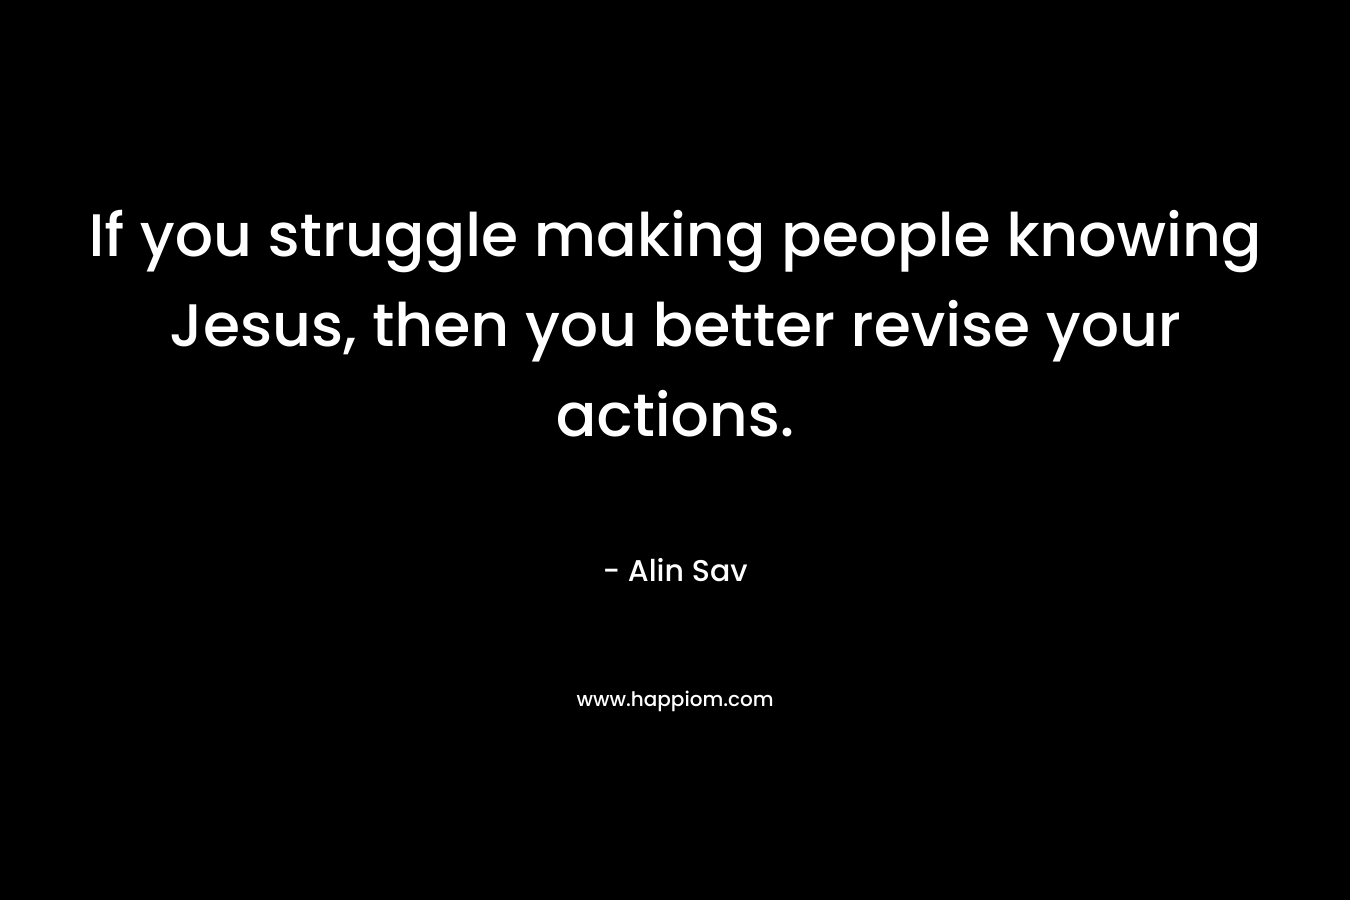 If you struggle making people knowing Jesus, then you better revise your actions. – Alin Sav